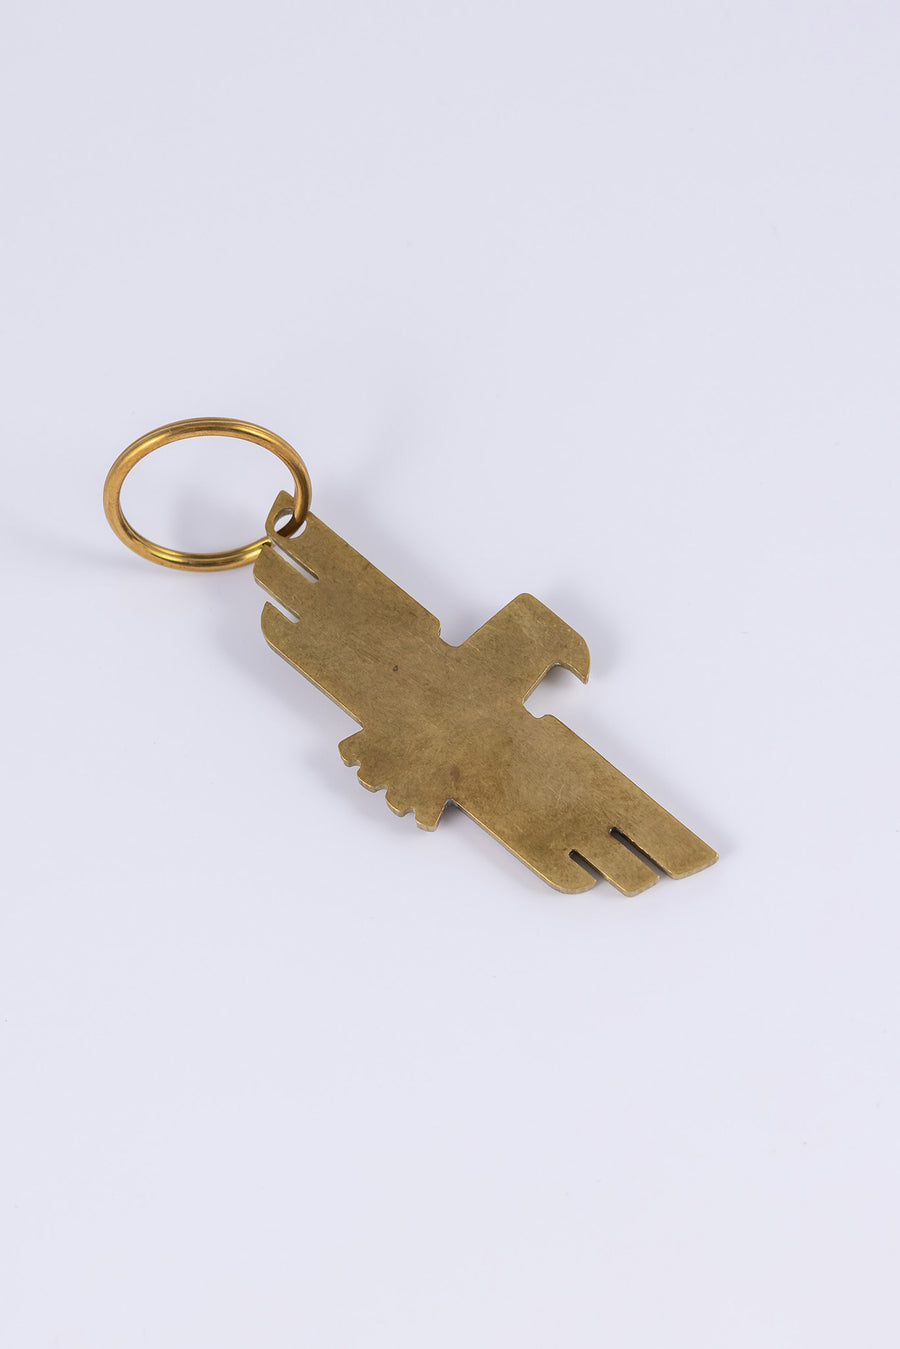 Brass keychain with thunderbird design that doubles as a bottle opener laid flat at a diagonal